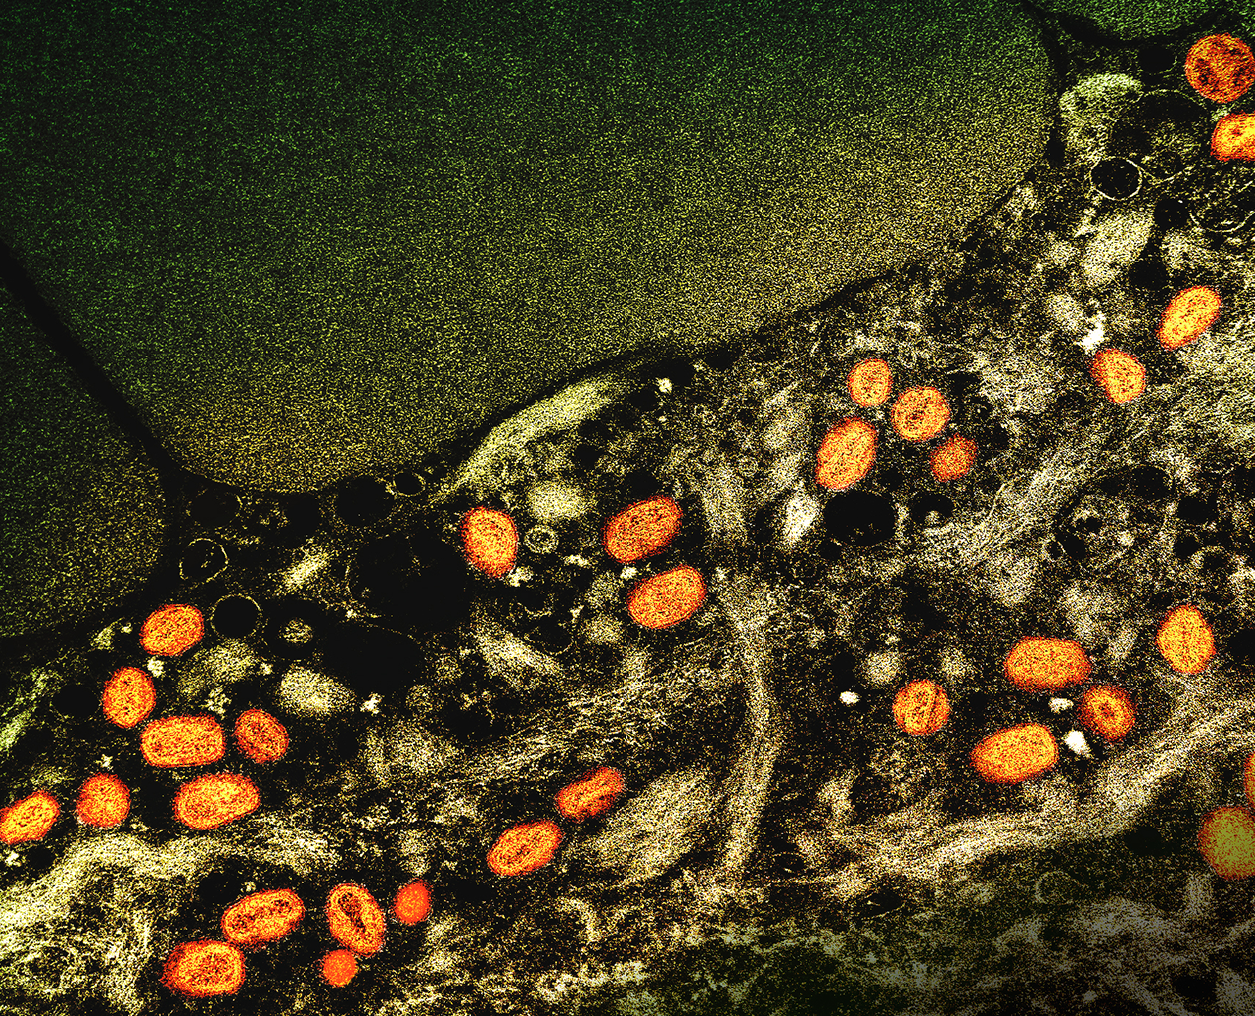 Medical News & Perspectives - Reports of Asymptomatic Monkeypox Suggest That, at the Very Least, Some Infections Go Unnoticed. Image Credit: NIAID